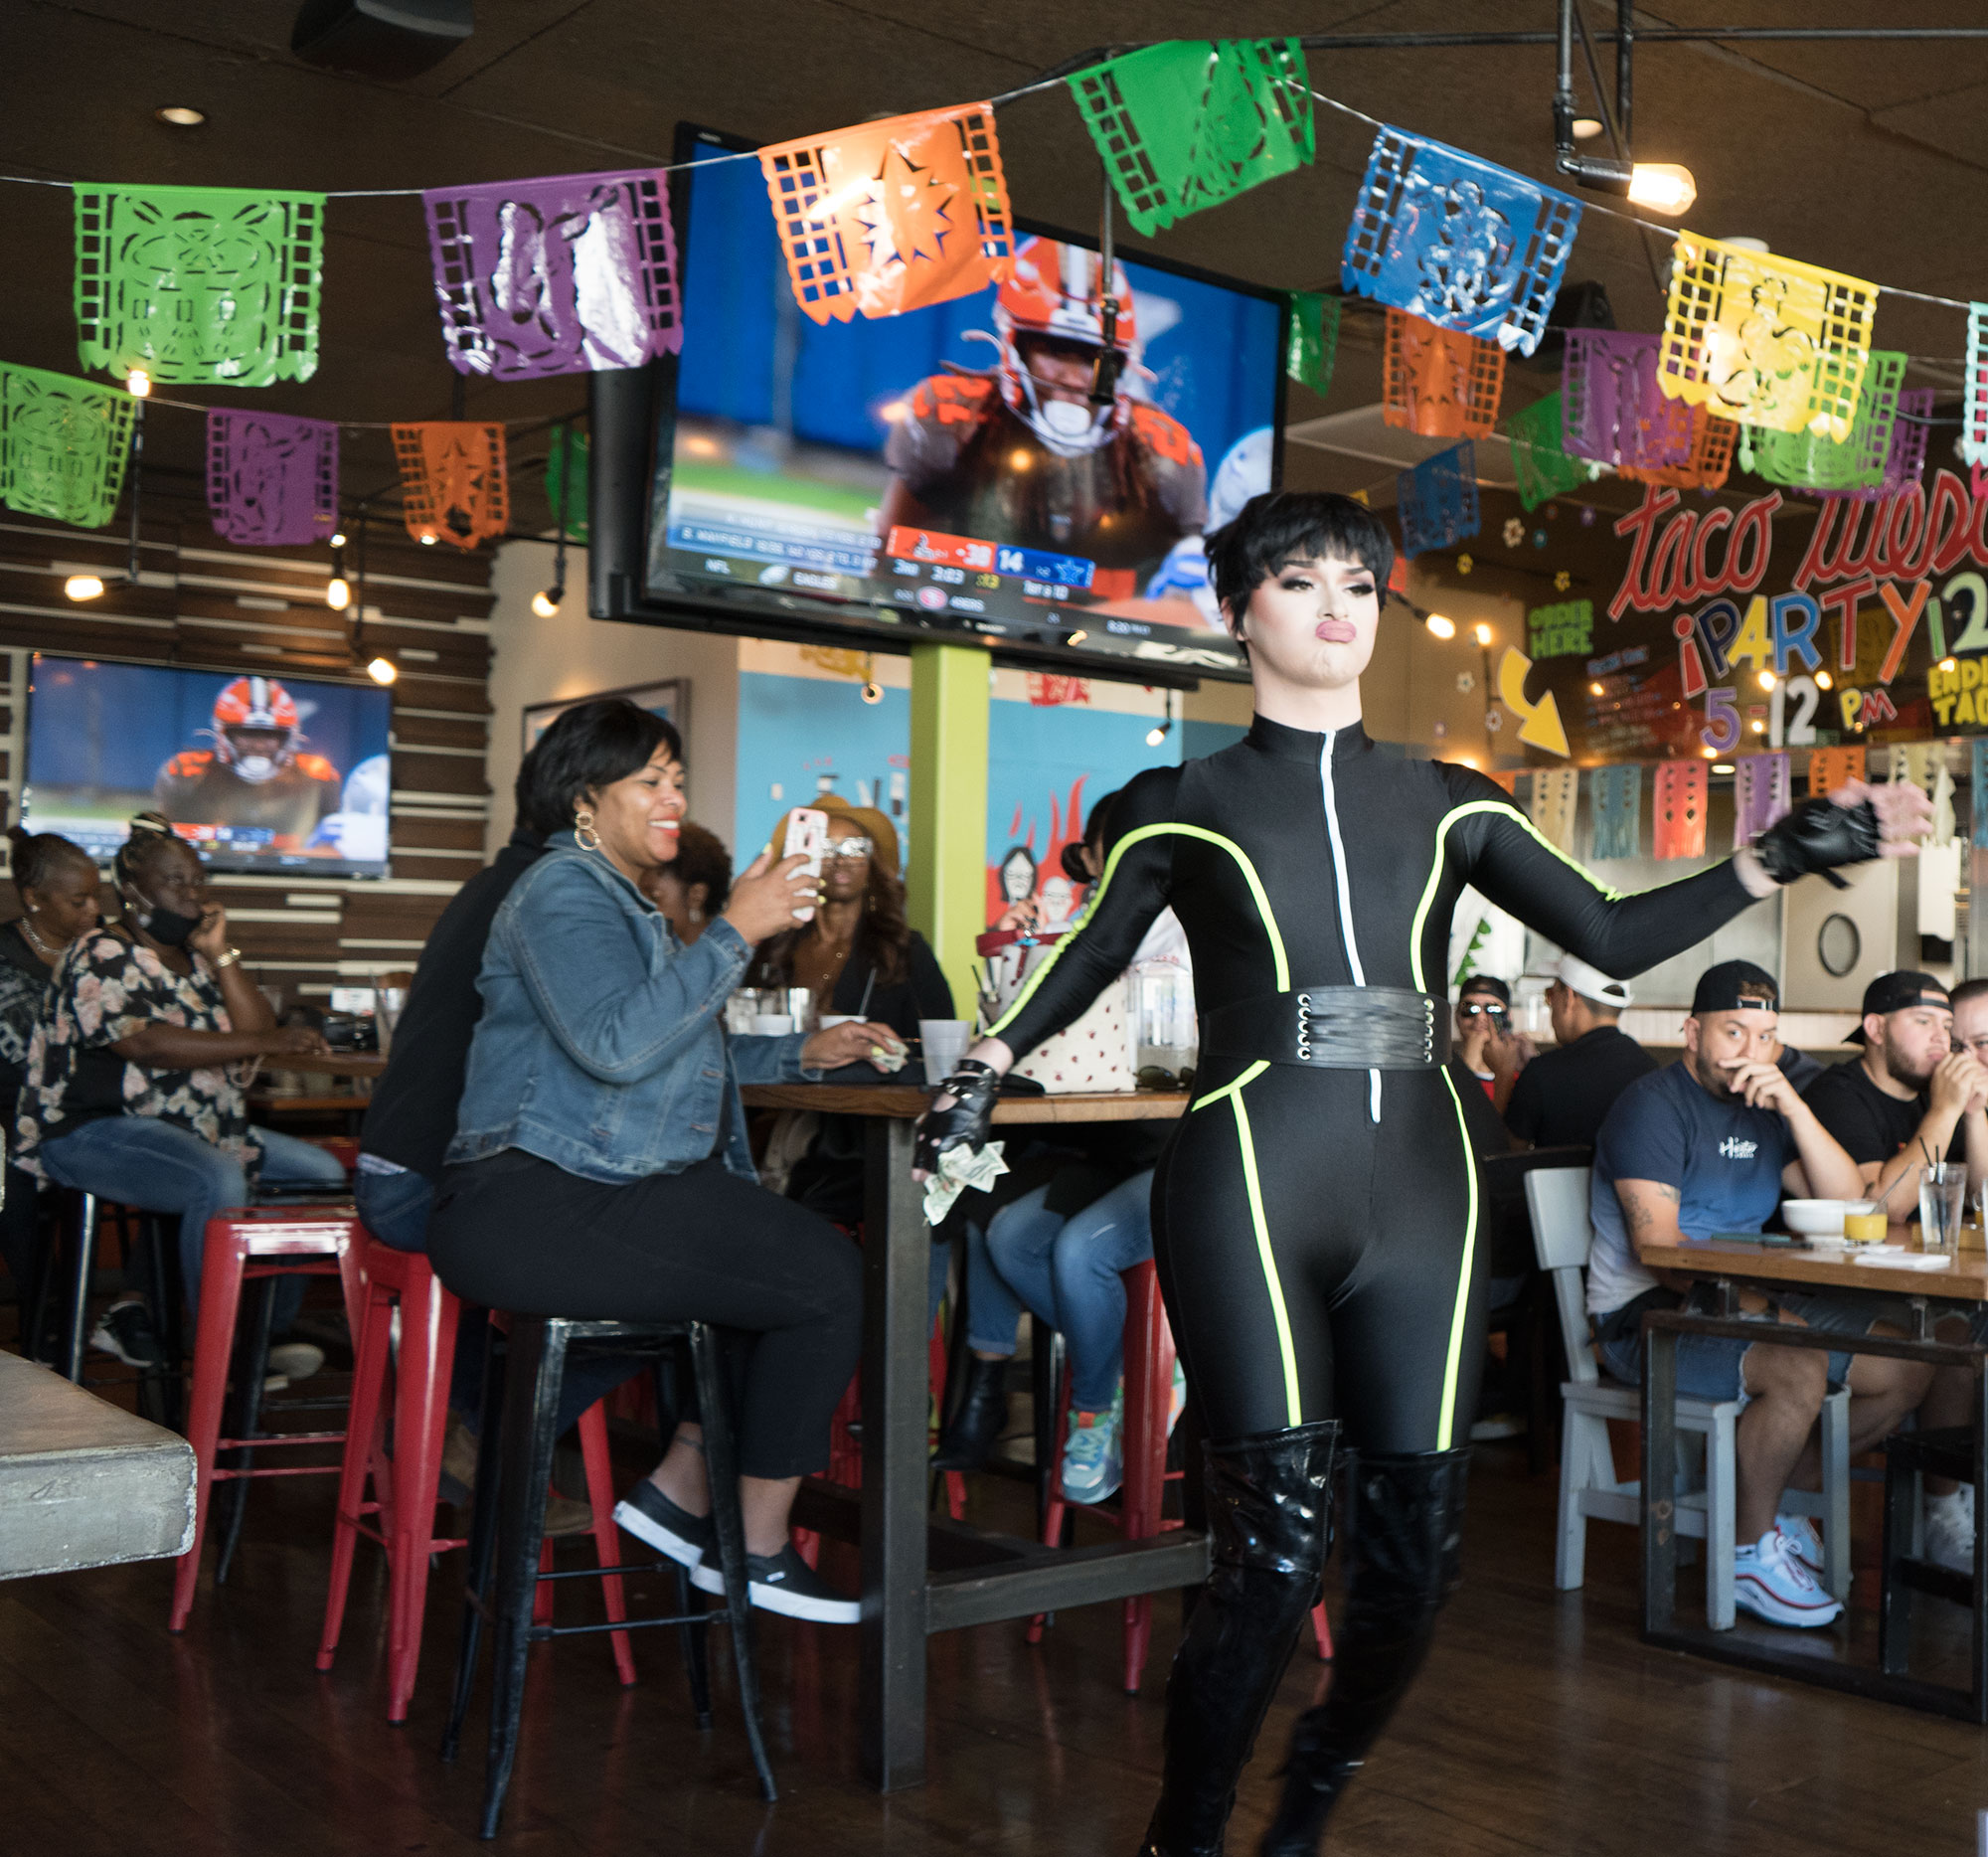 Lady Monroe performing at Tacos and Tequila Drag Brunch in Uptown Dallas.